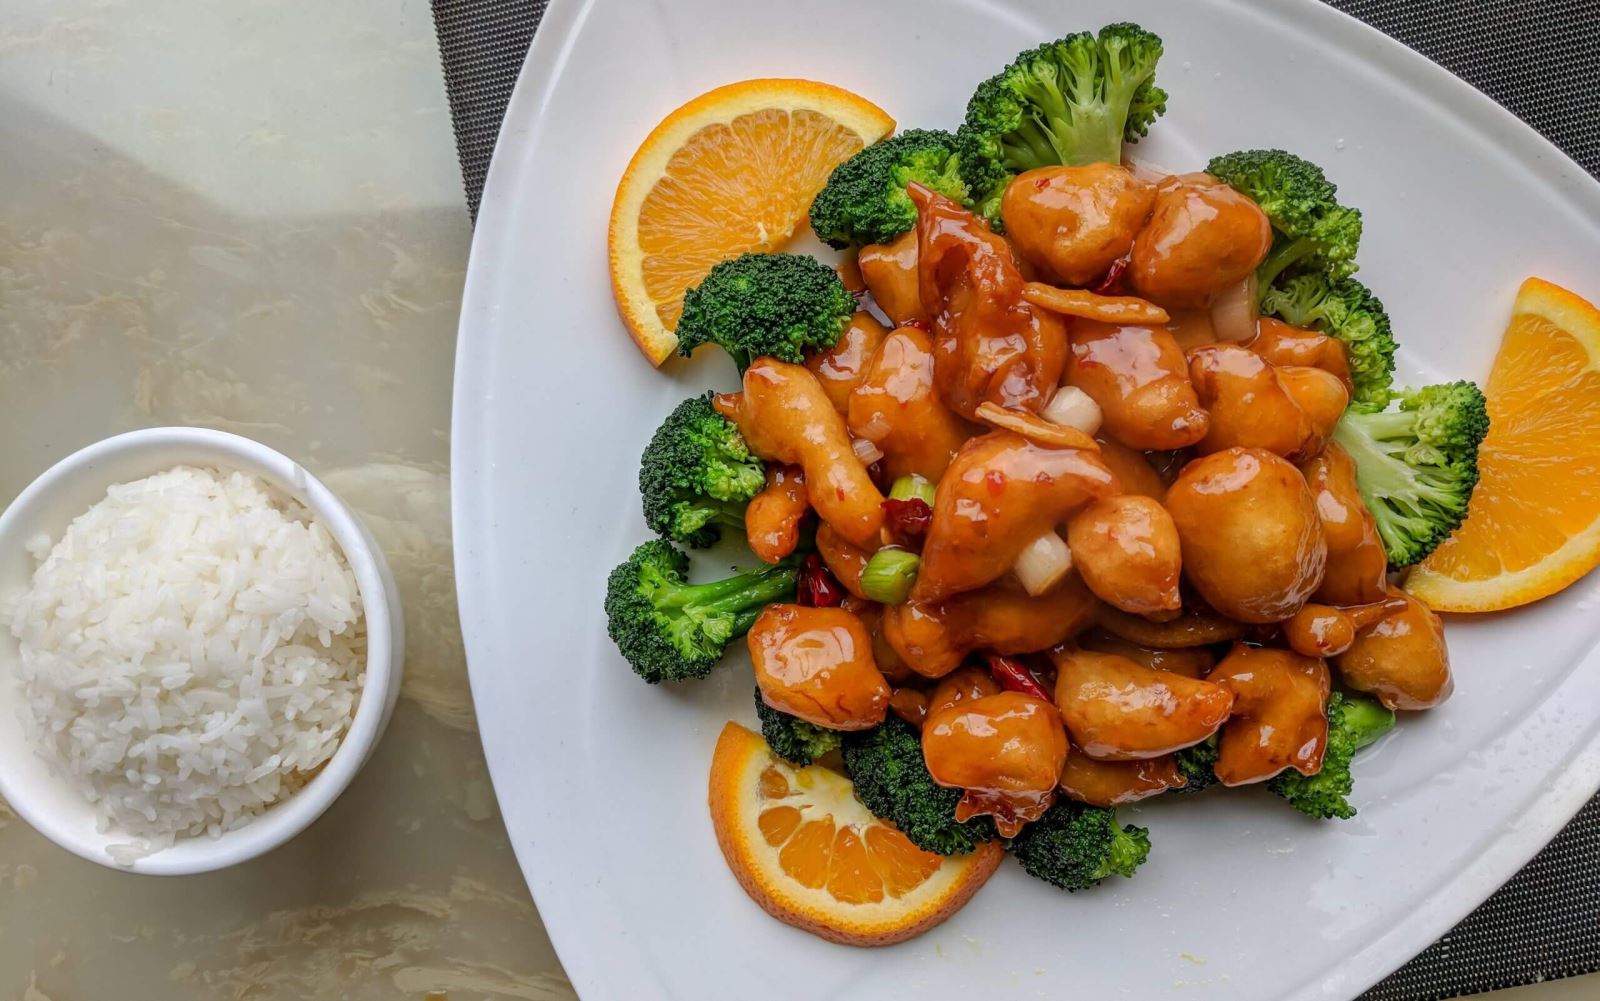 bowl of rice and plate of Asian chicken and broccoli dish with orange slices